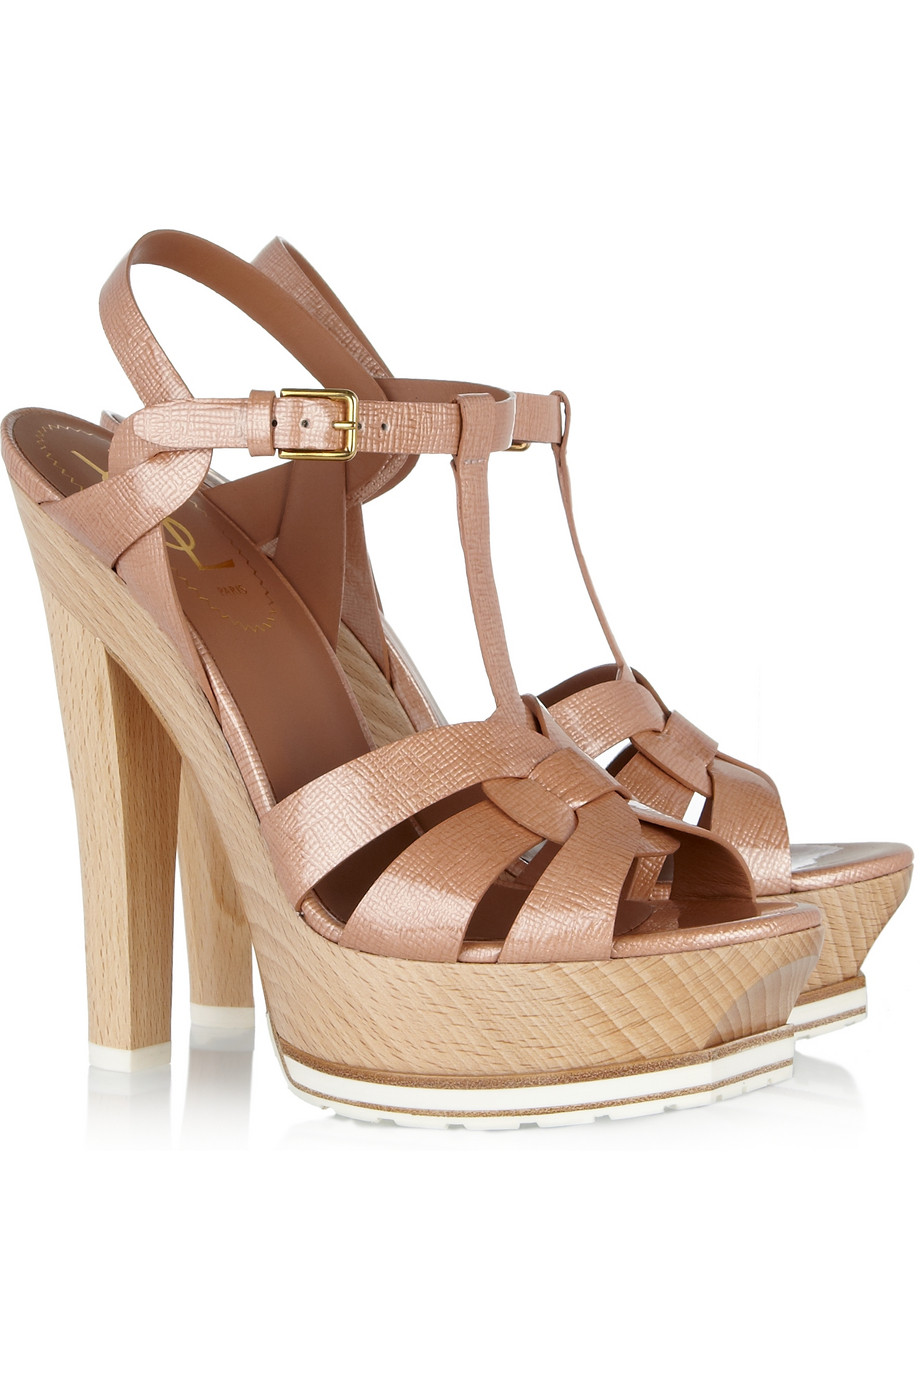 Saint Laurent Tribute Patentleather and Wood Sandals in Natural | Lyst